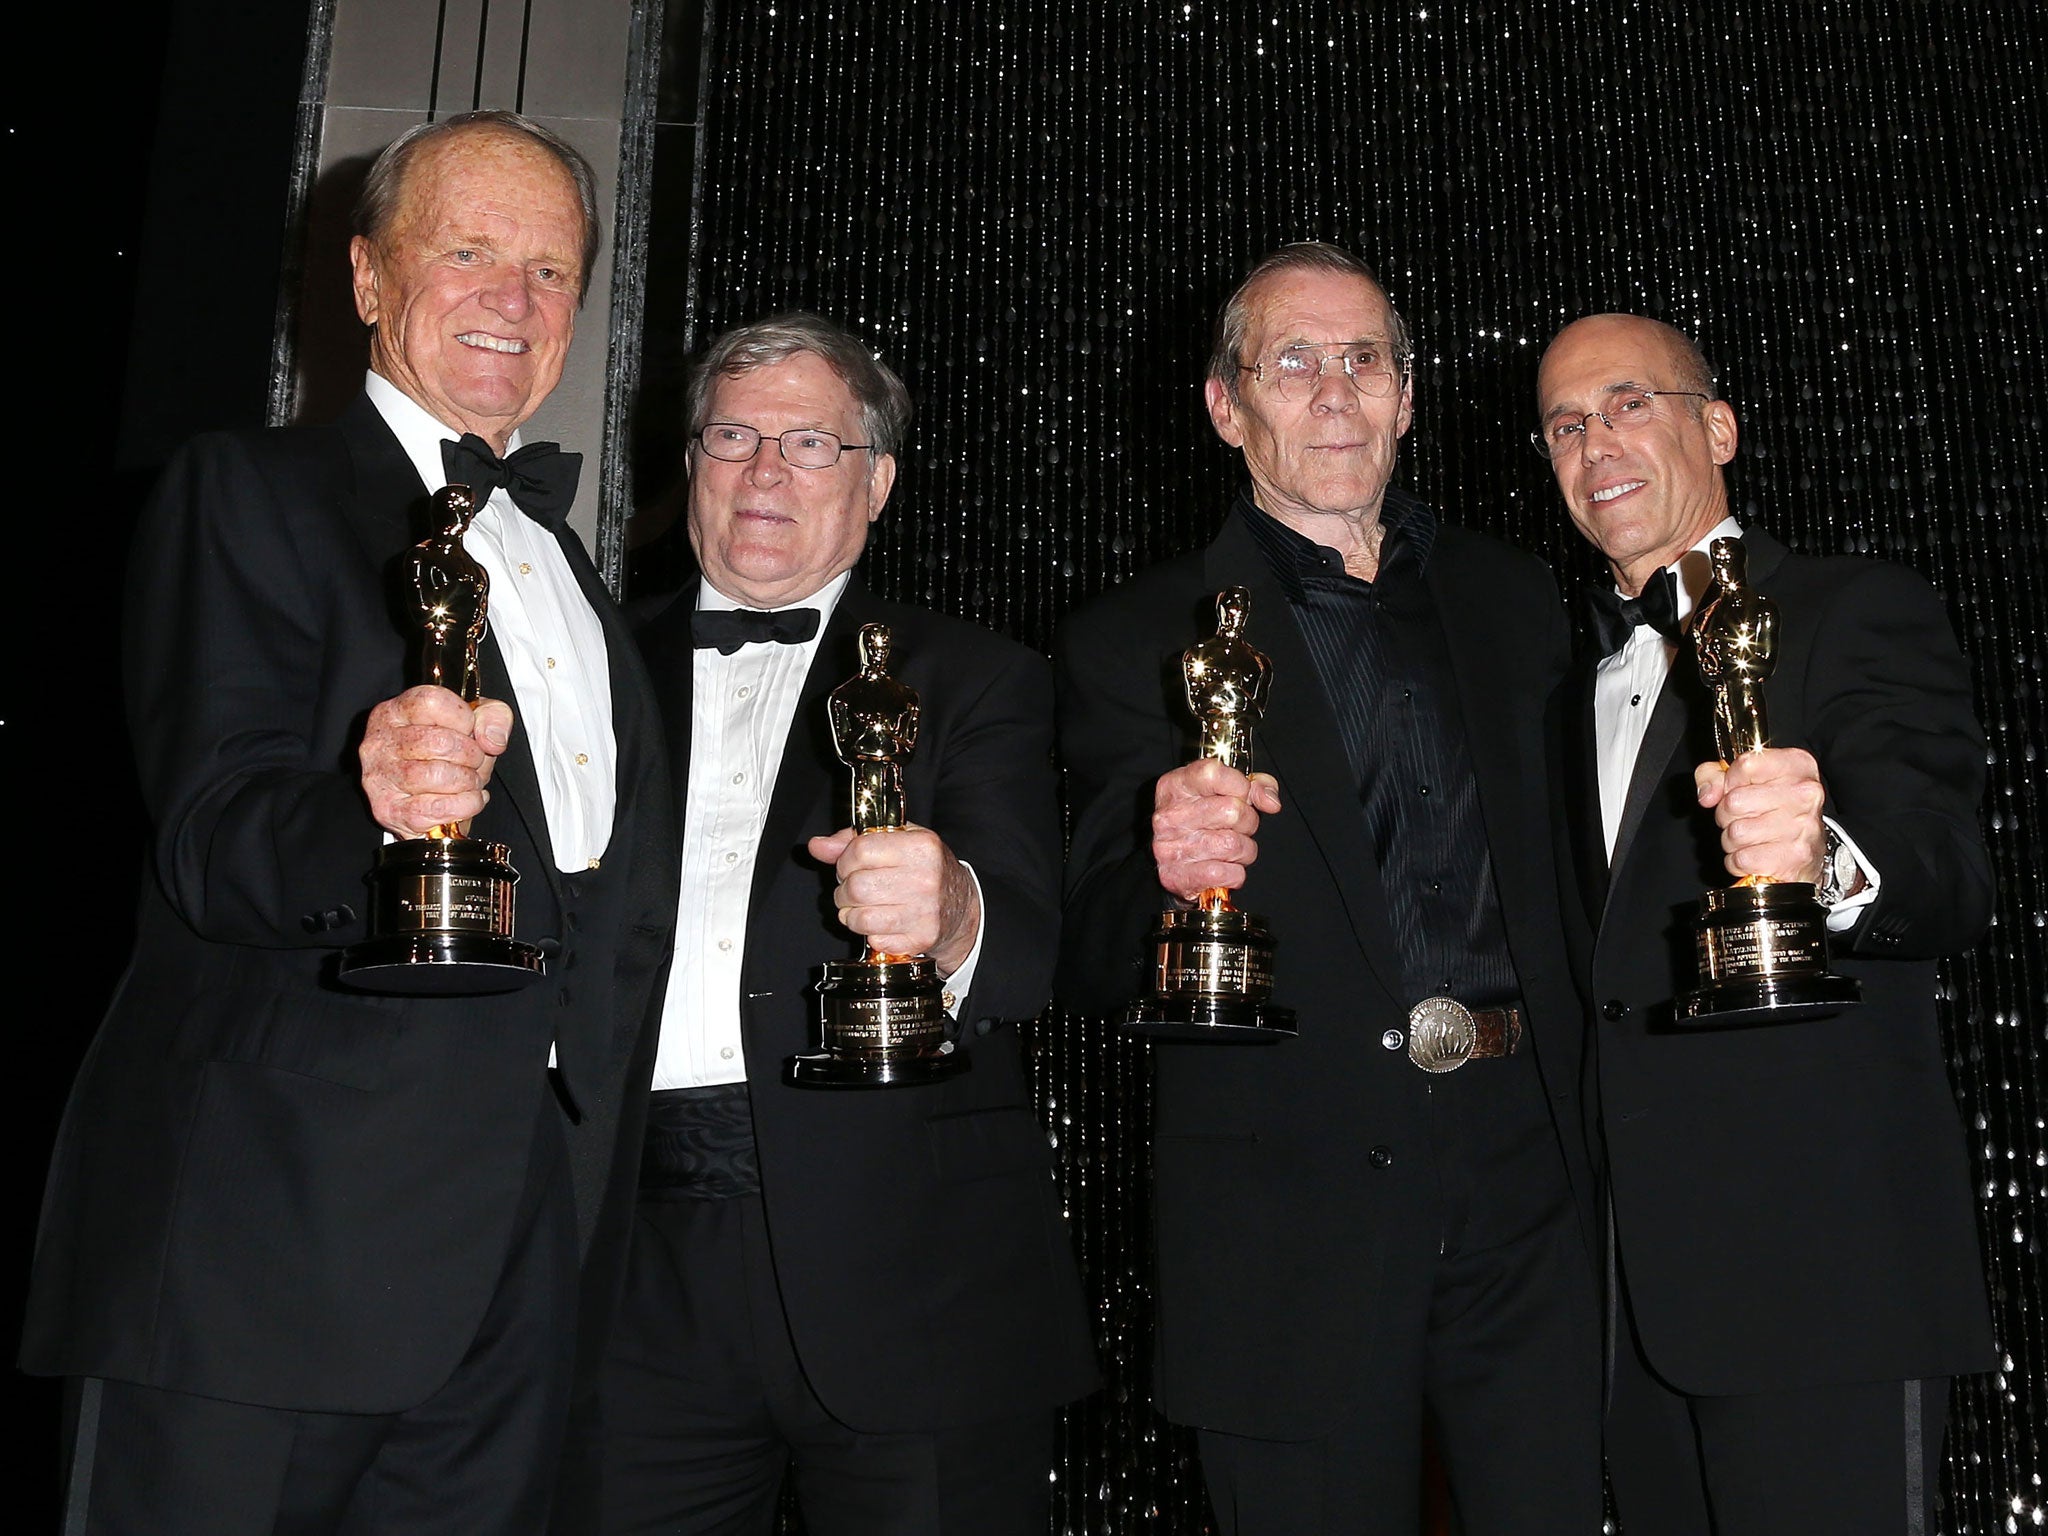 Oscars recognition: George Stevens Jr, DA Pennebaker, Hal Needham and Jeffrey Katzenberg receive Governors Awards from the Academy in 2012 (Getty)